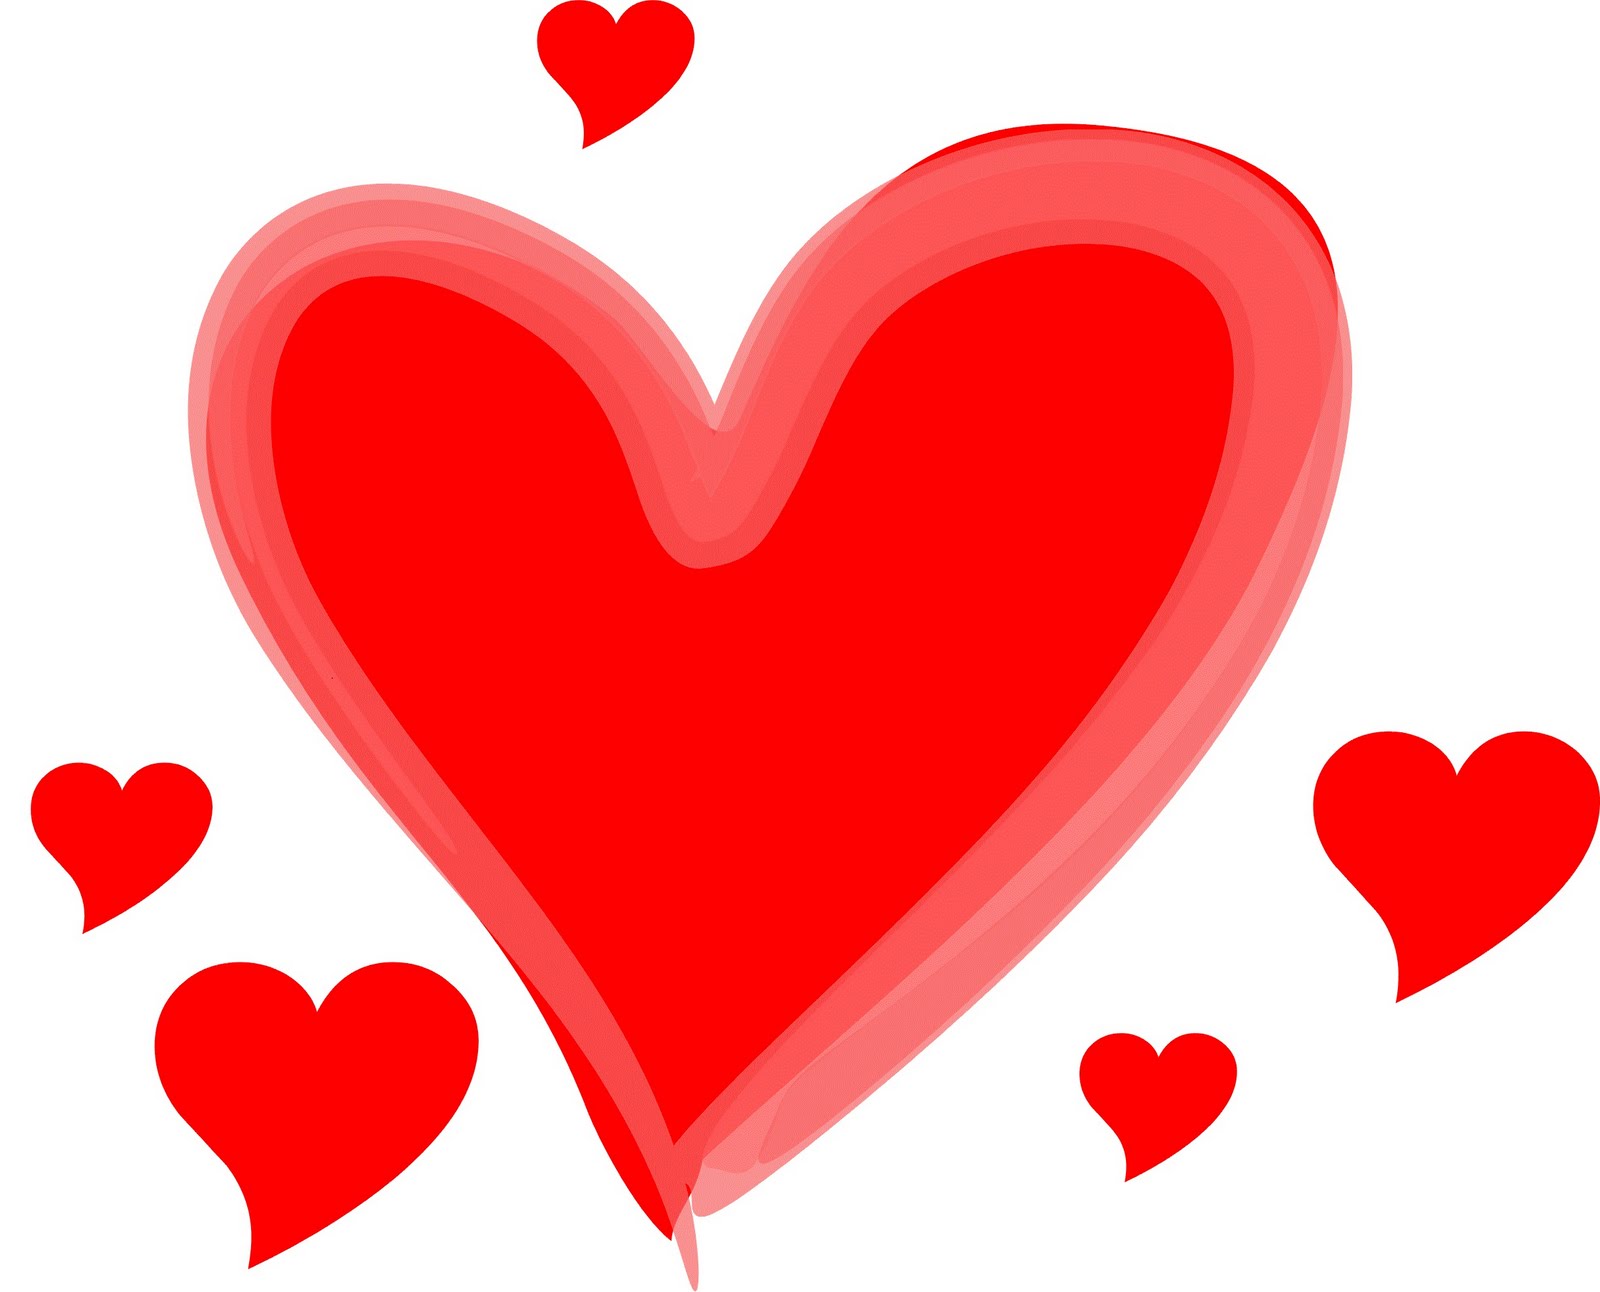 Symbols Of Love Pictures - ClipArt Best